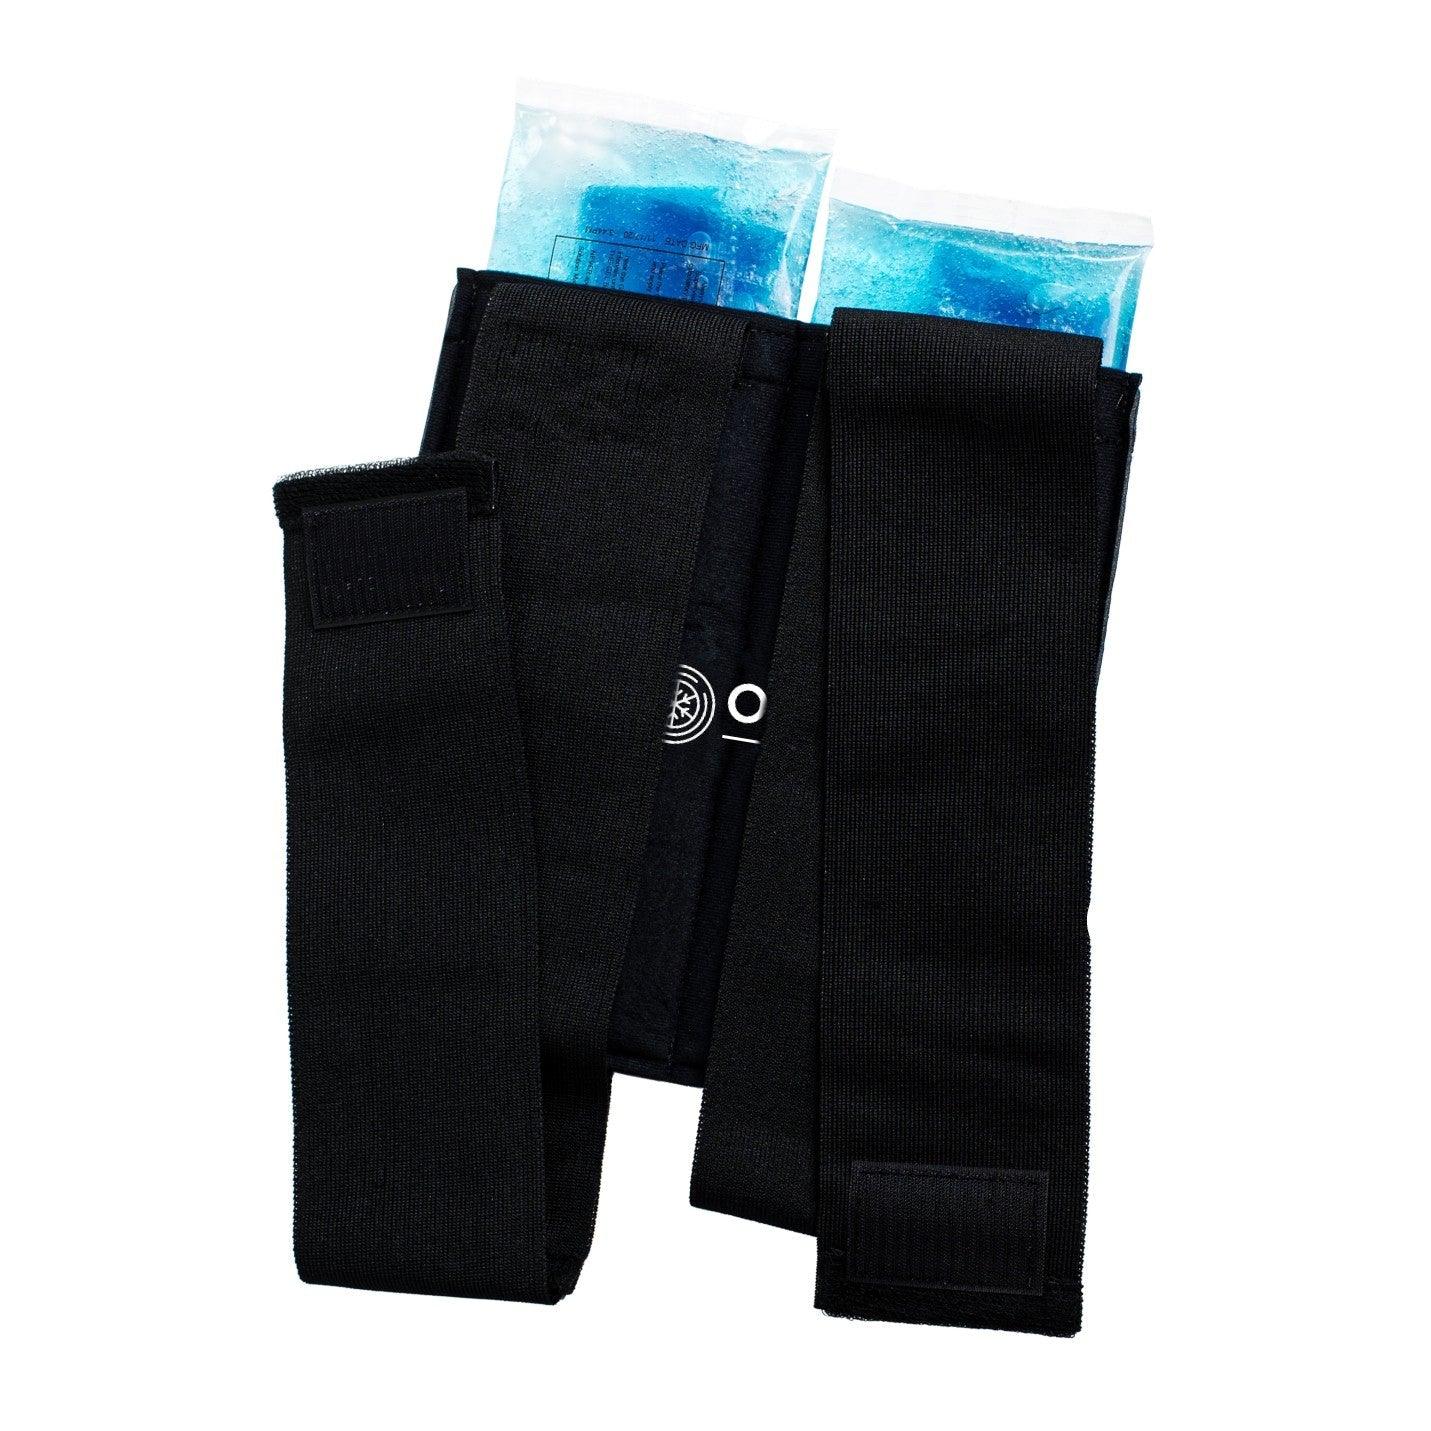 Omni Ice Ultimate Cold + Compression Wraps - OMNI-H-4-IP Omni Ice Ultimate Cold + Compression Wraps - undefined by Supply Physical Therapy Compression Straps, Elbow, Hand and Wrist, Hip, Hip and Knee, ice wrap, Knee, Shoulder, SMI Cold Therapy